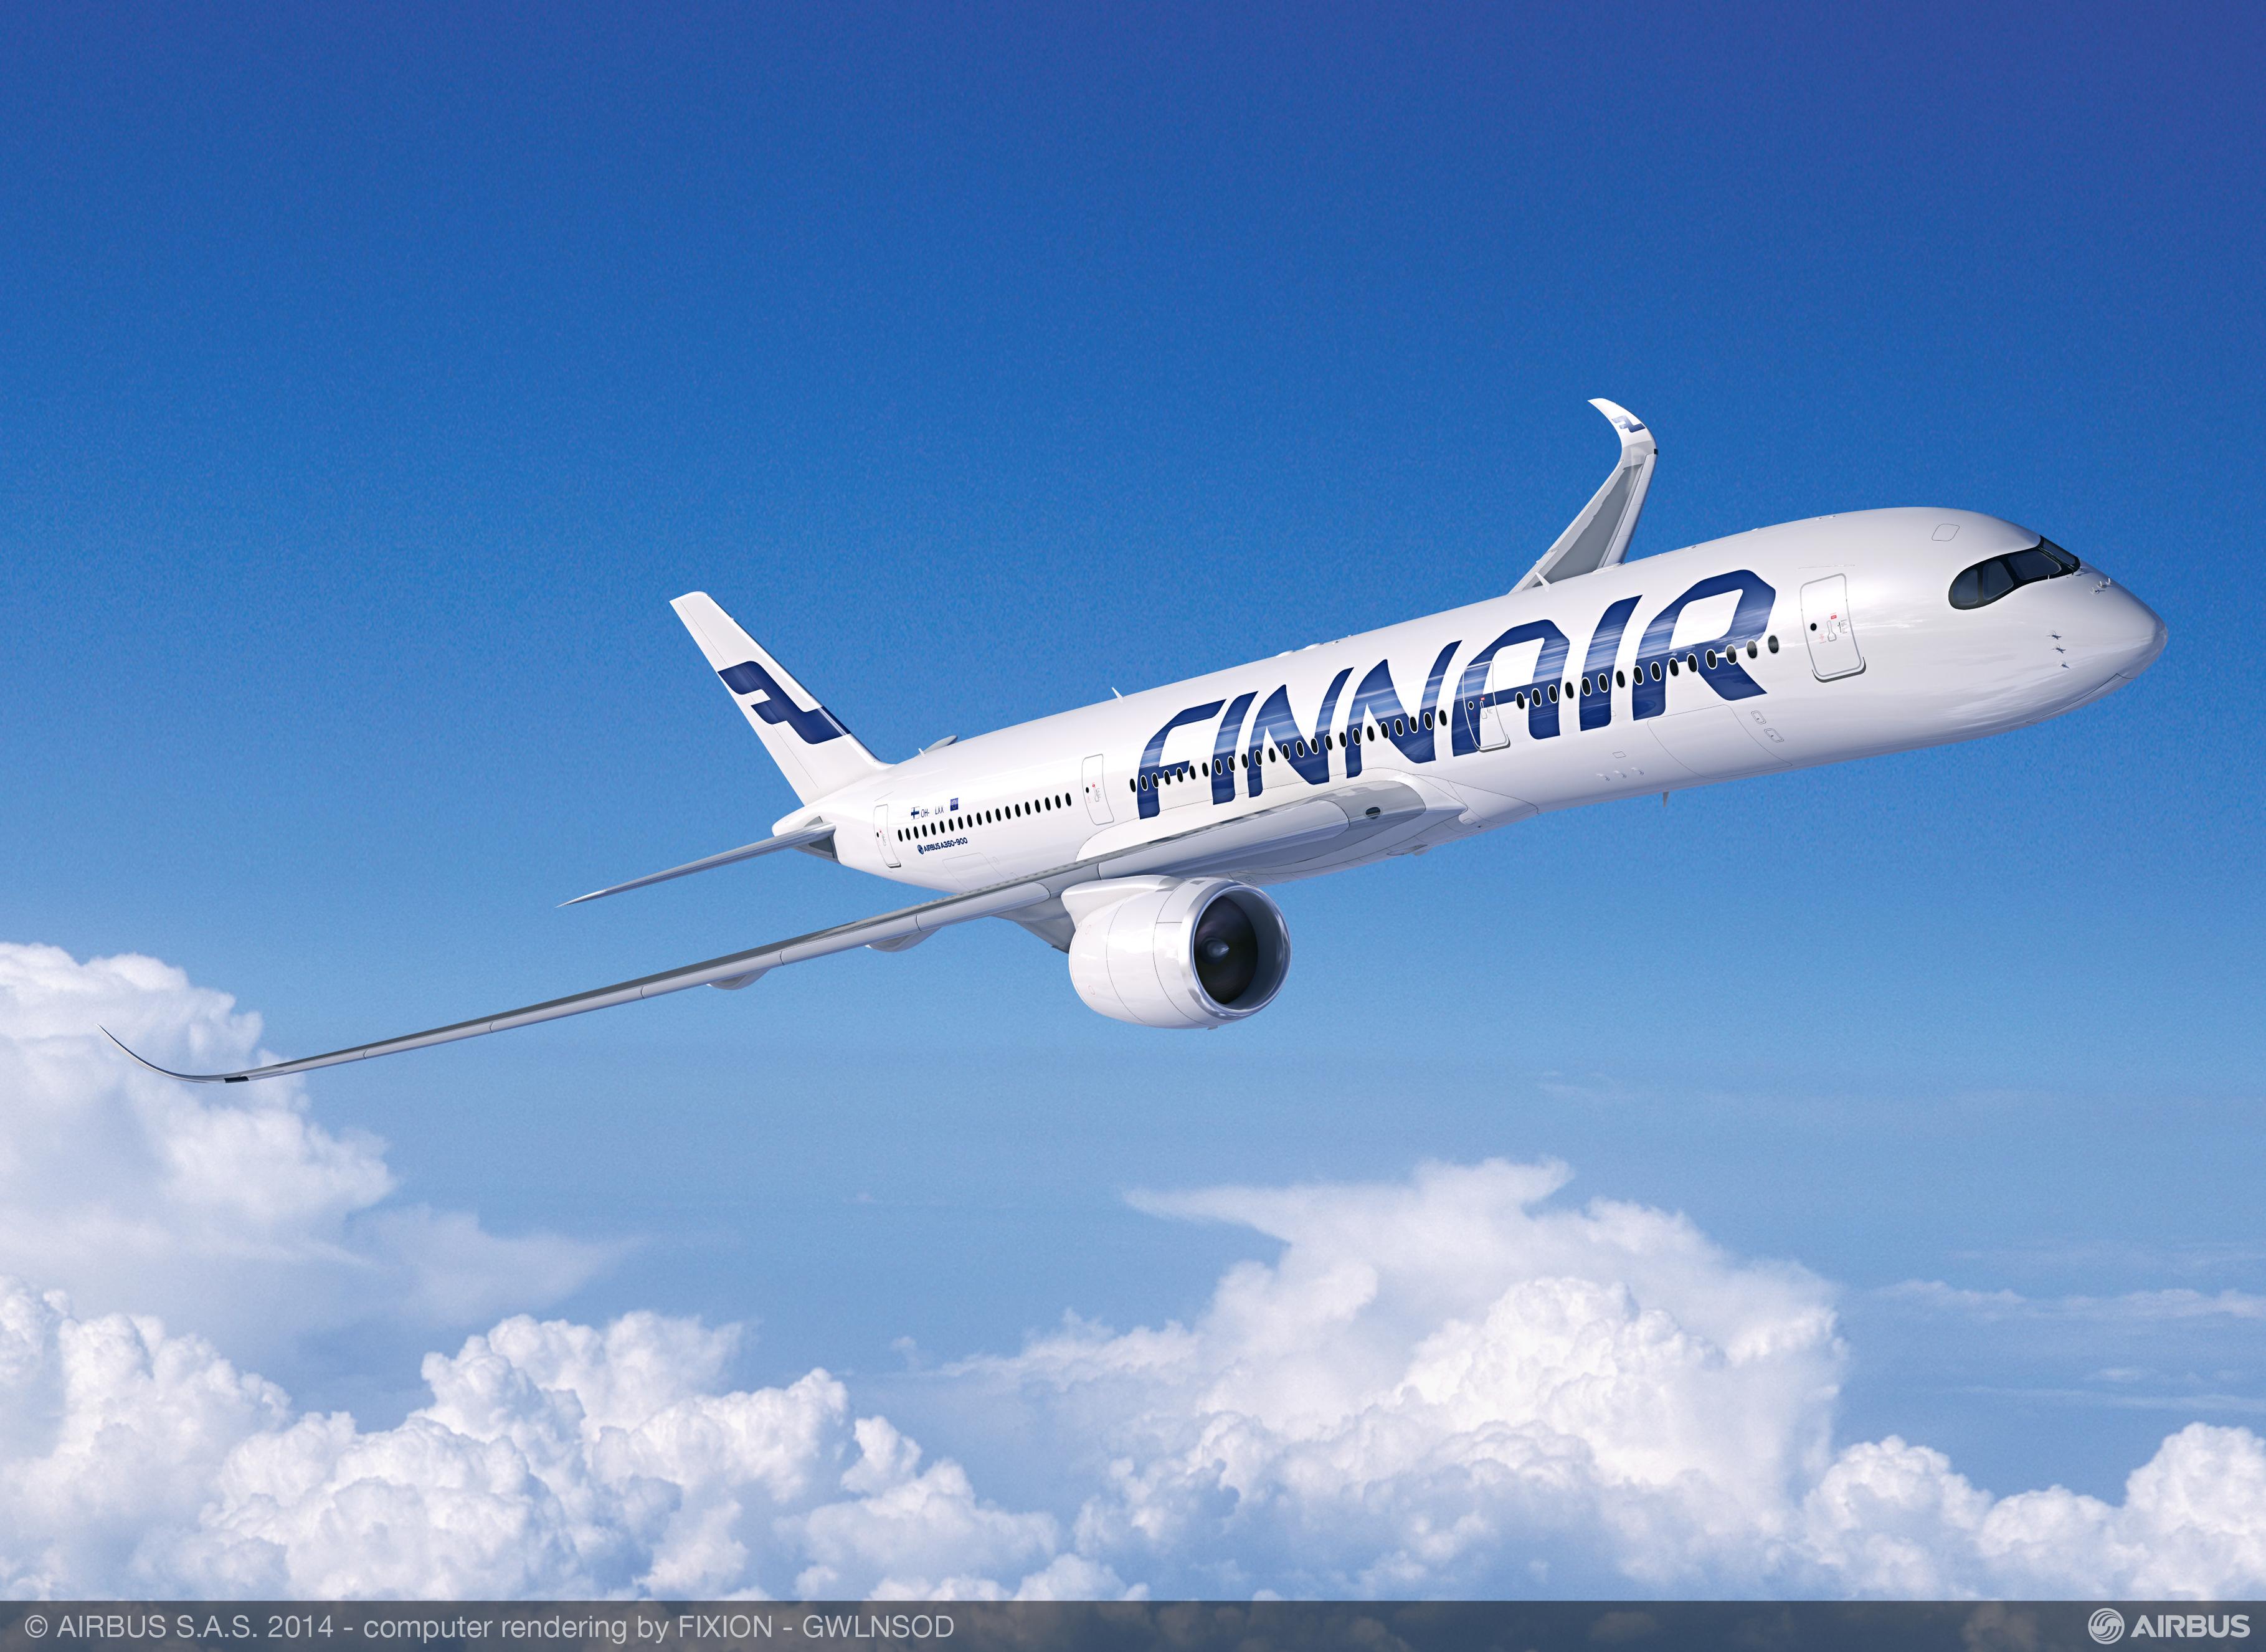 Finnair’s new A350 features a host of innovative passenger experience elements